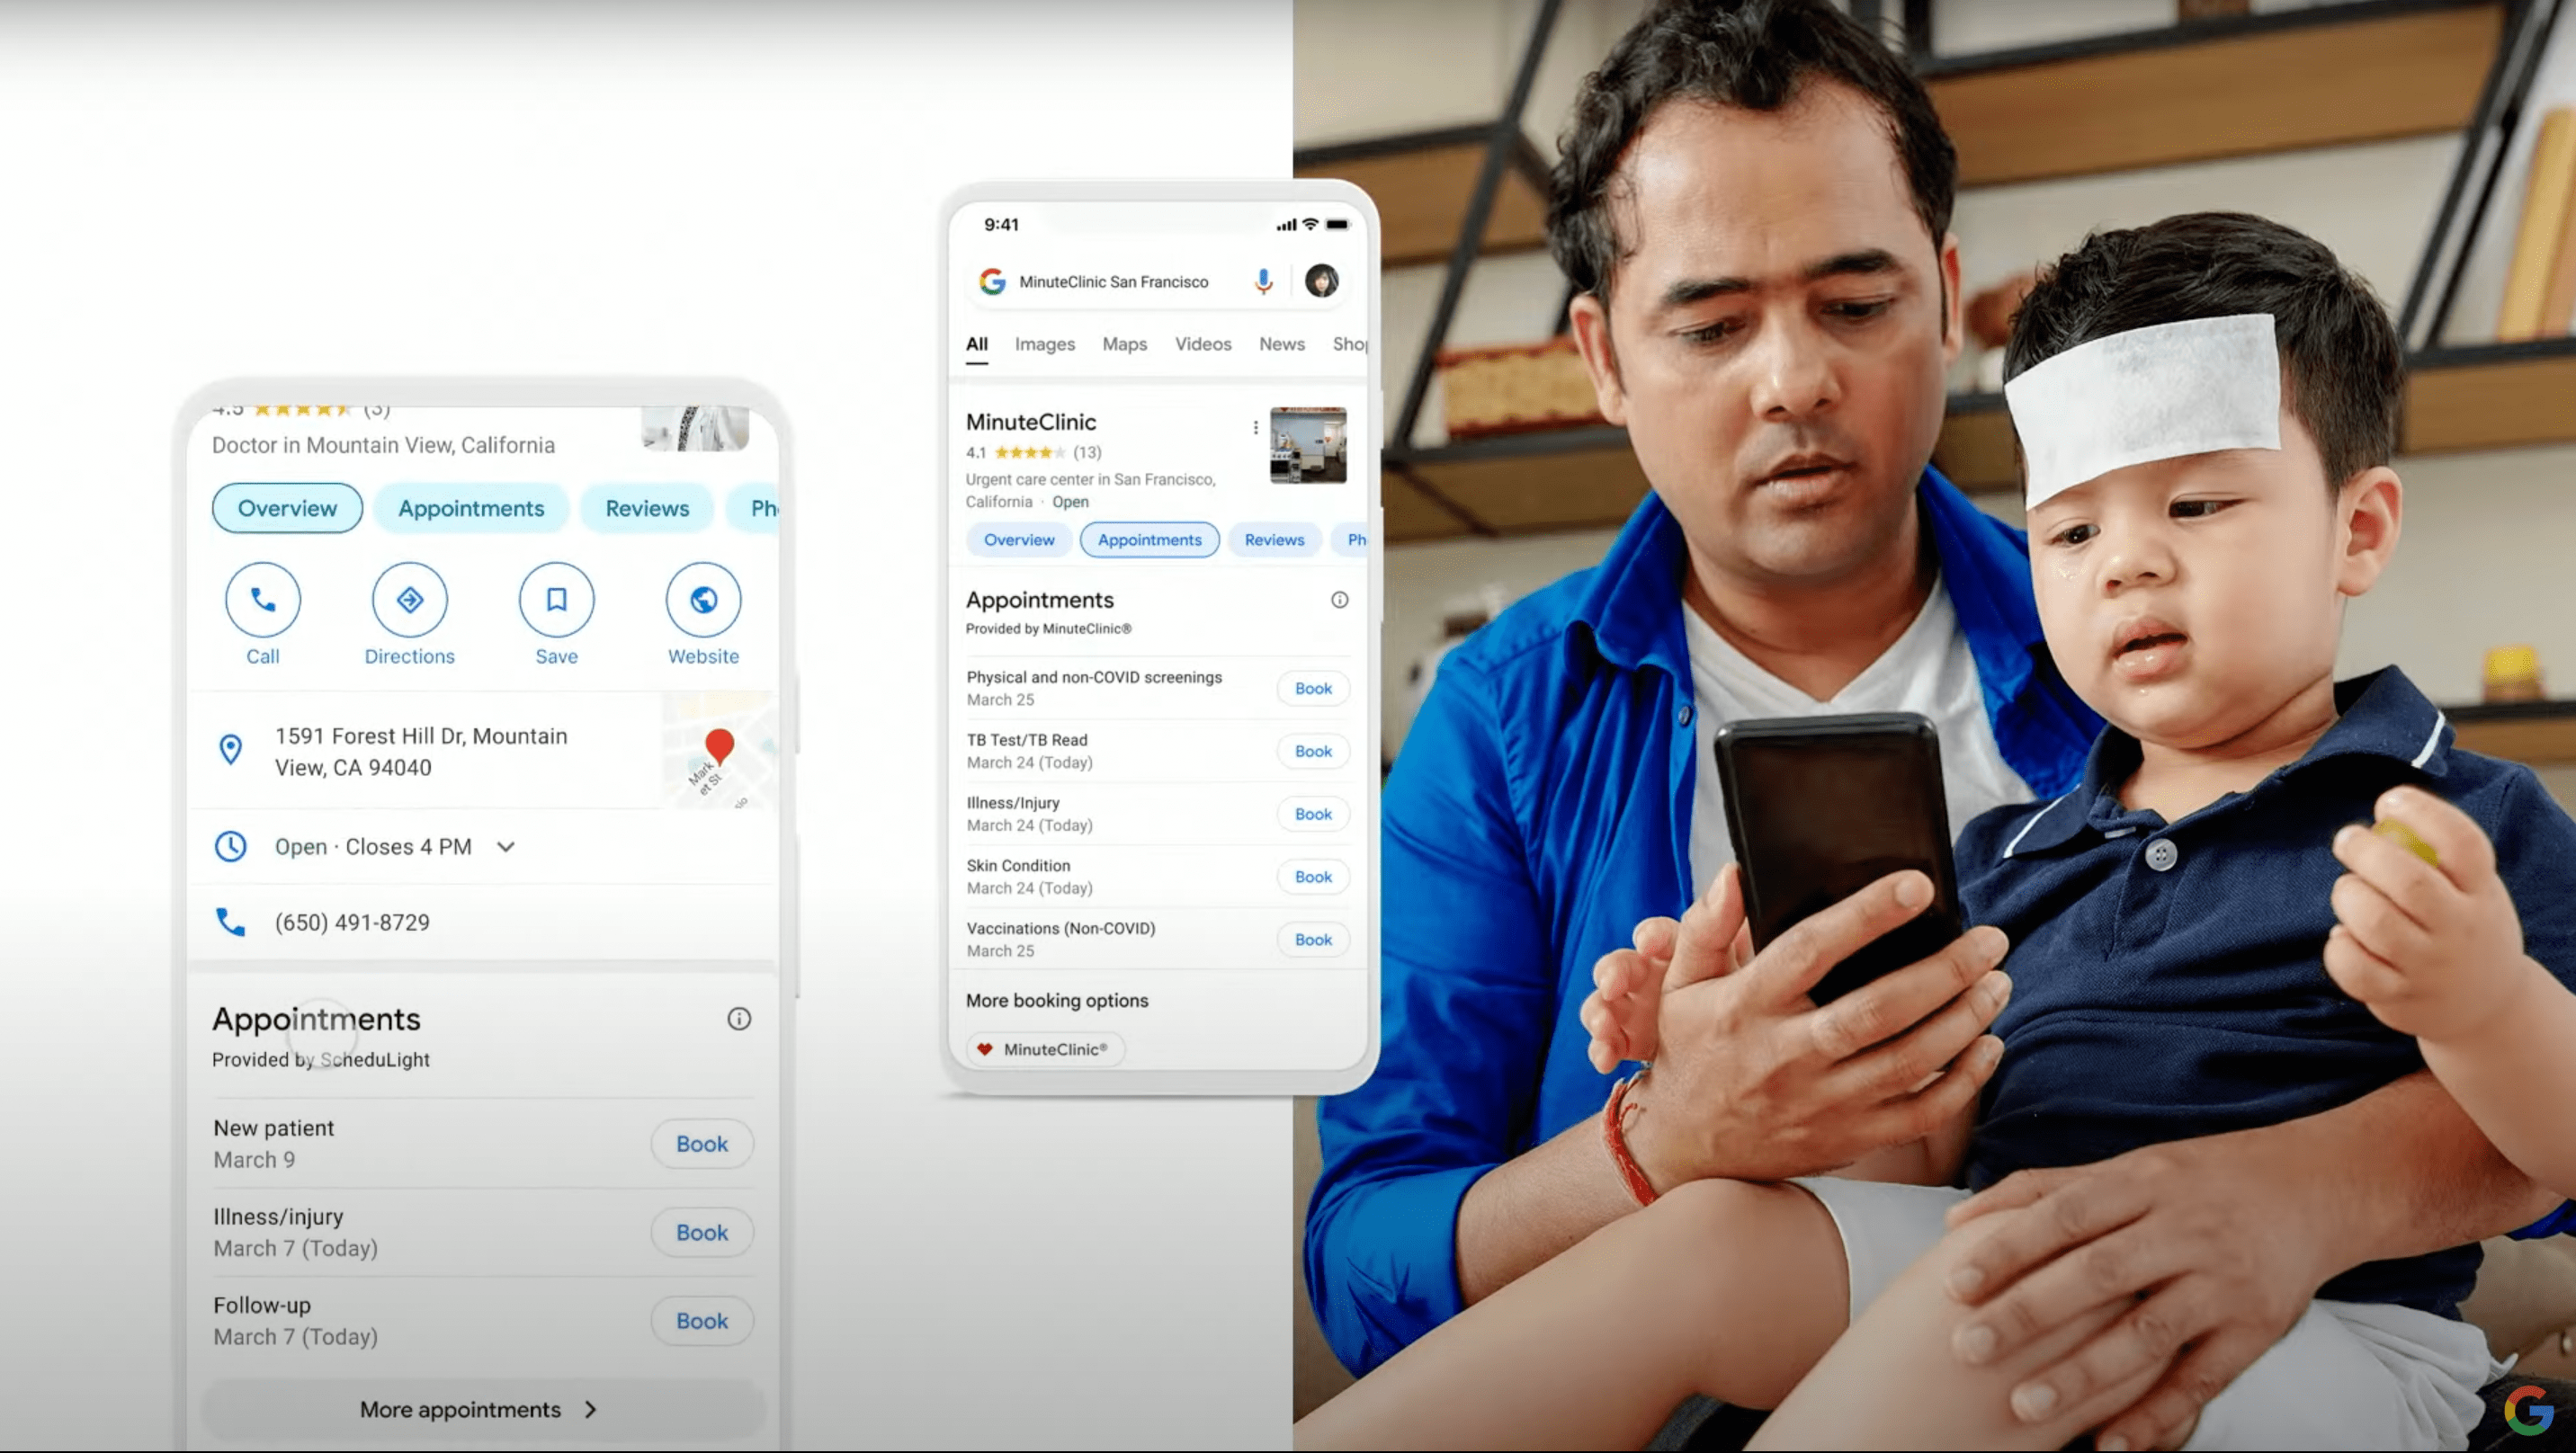 Google is launching major updates to how it serves health info